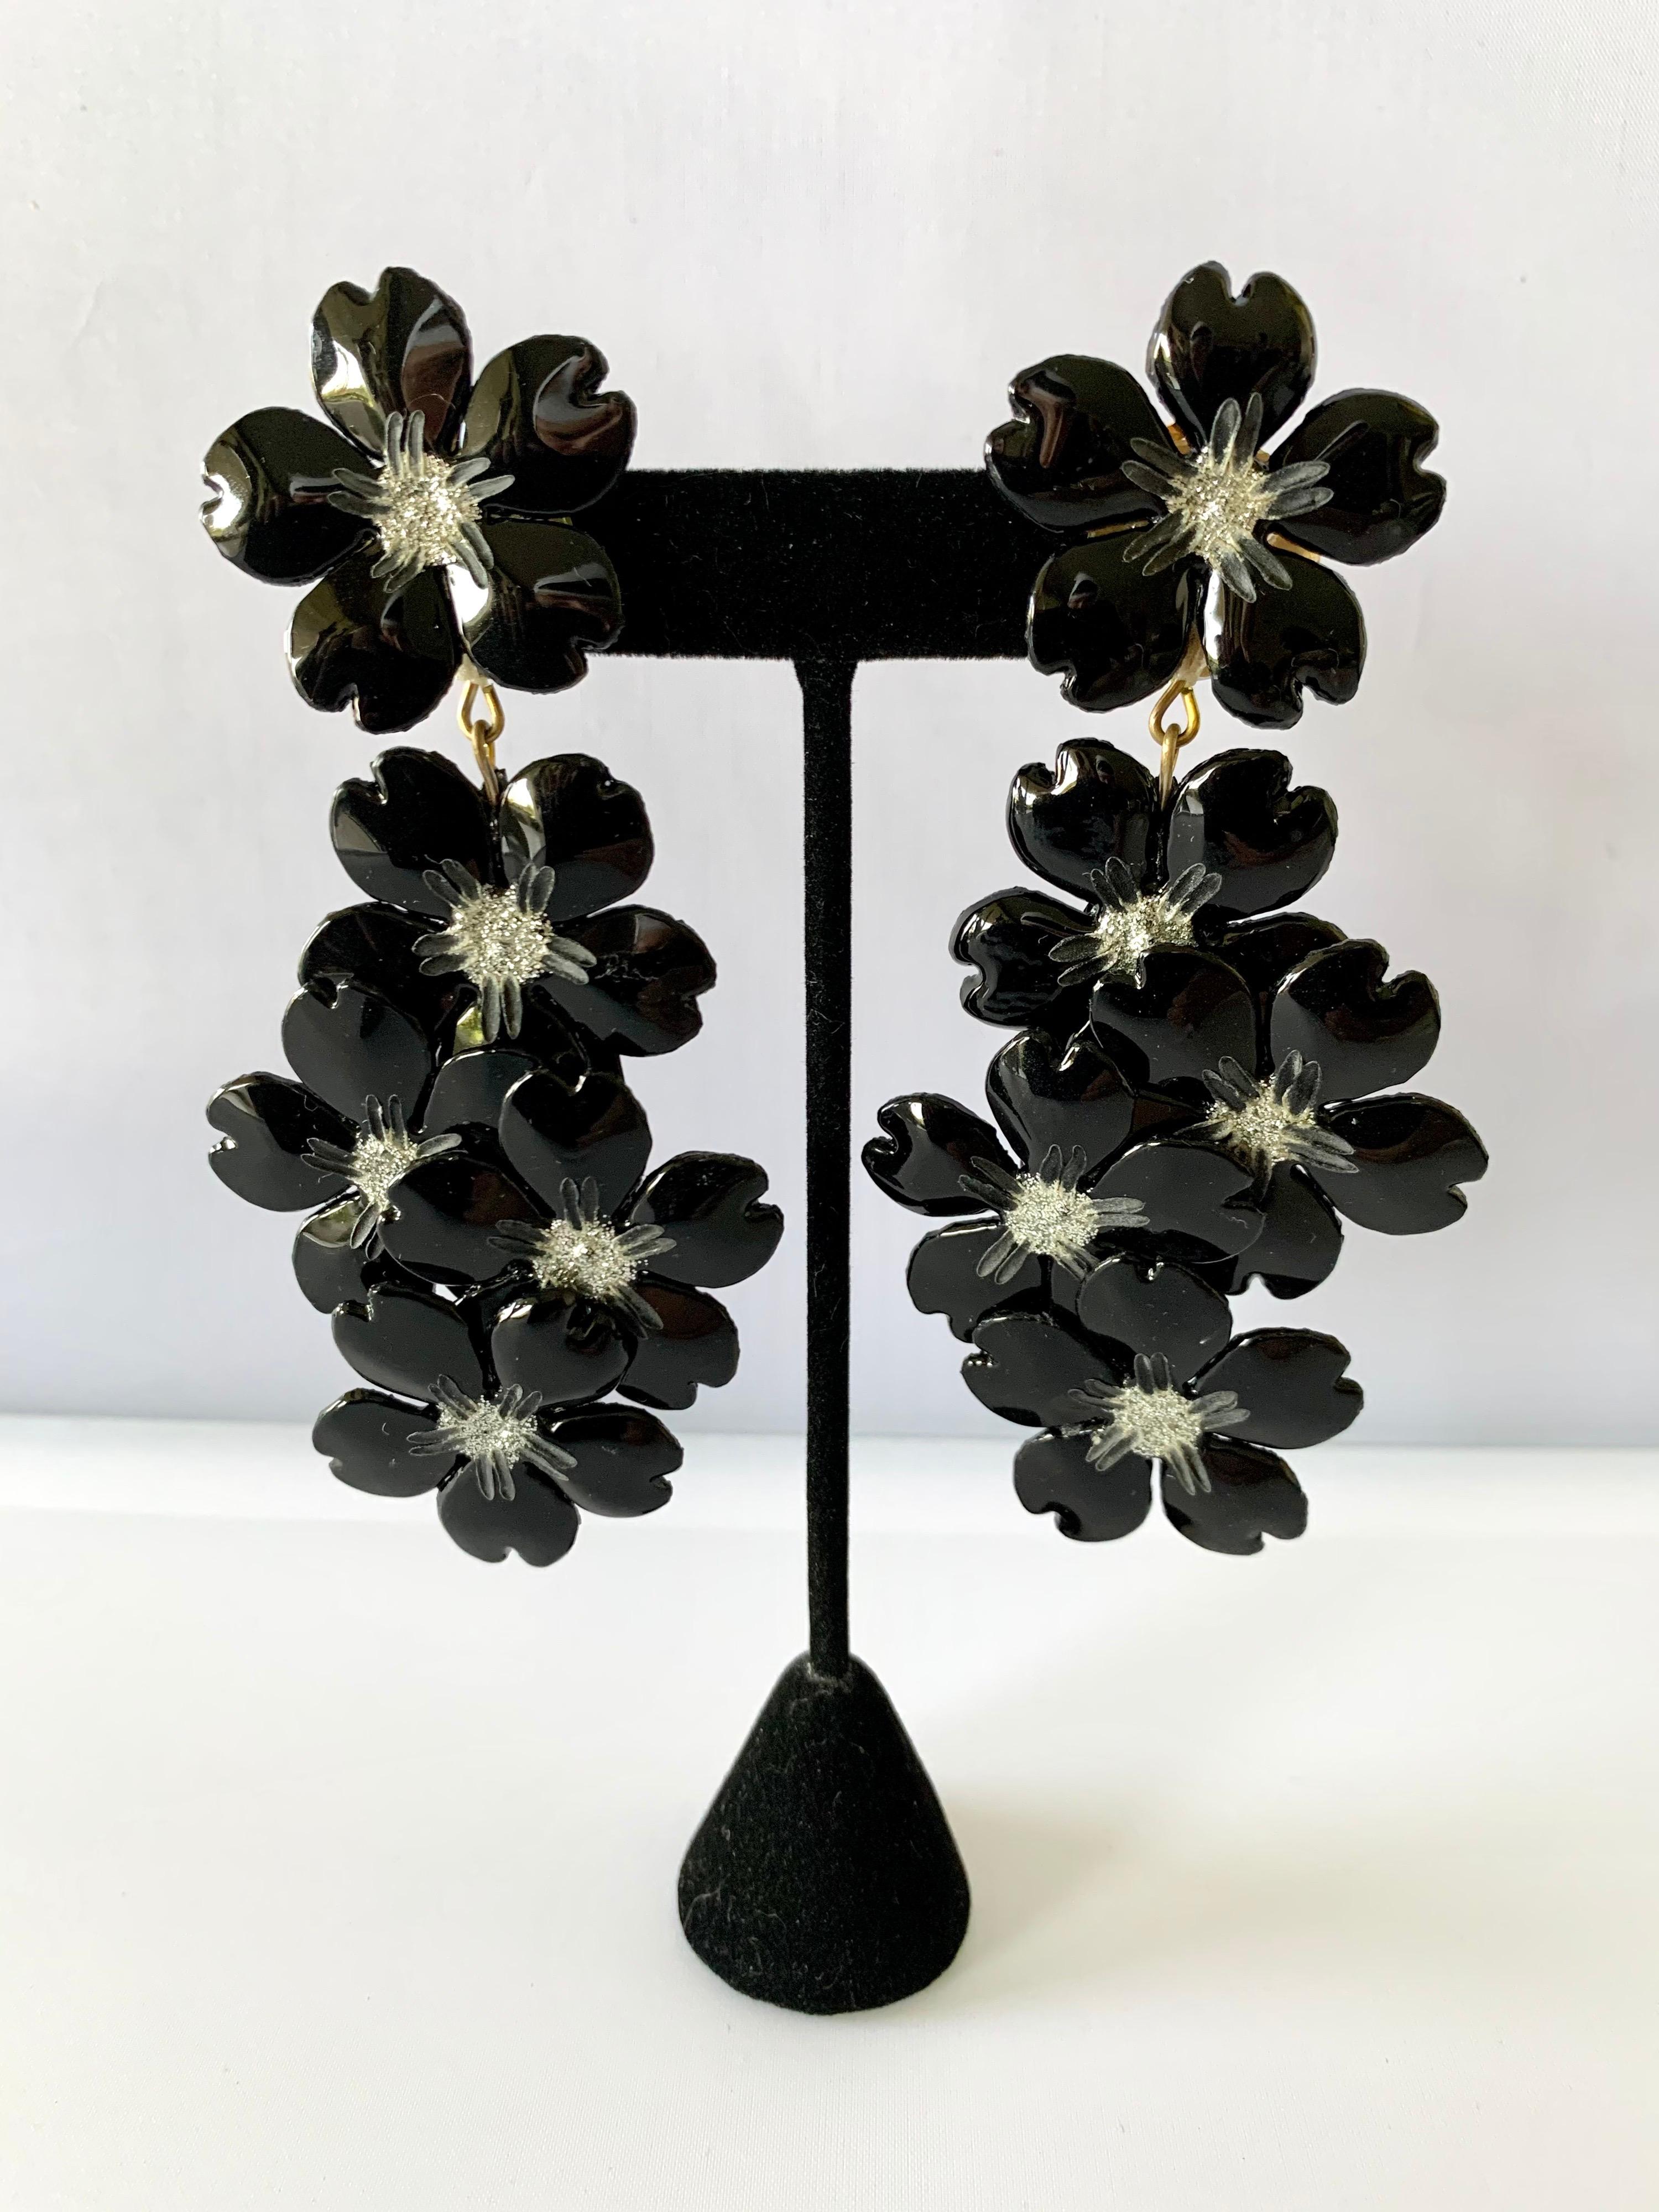 French designer black flower chandelier statement clip-on earrings made in Paris by Cilea - the lightweight chic earrings are comprised of enameline (enamel and resin) and feature a bold/unique design with exquisite hand-applied details Cilea Paris